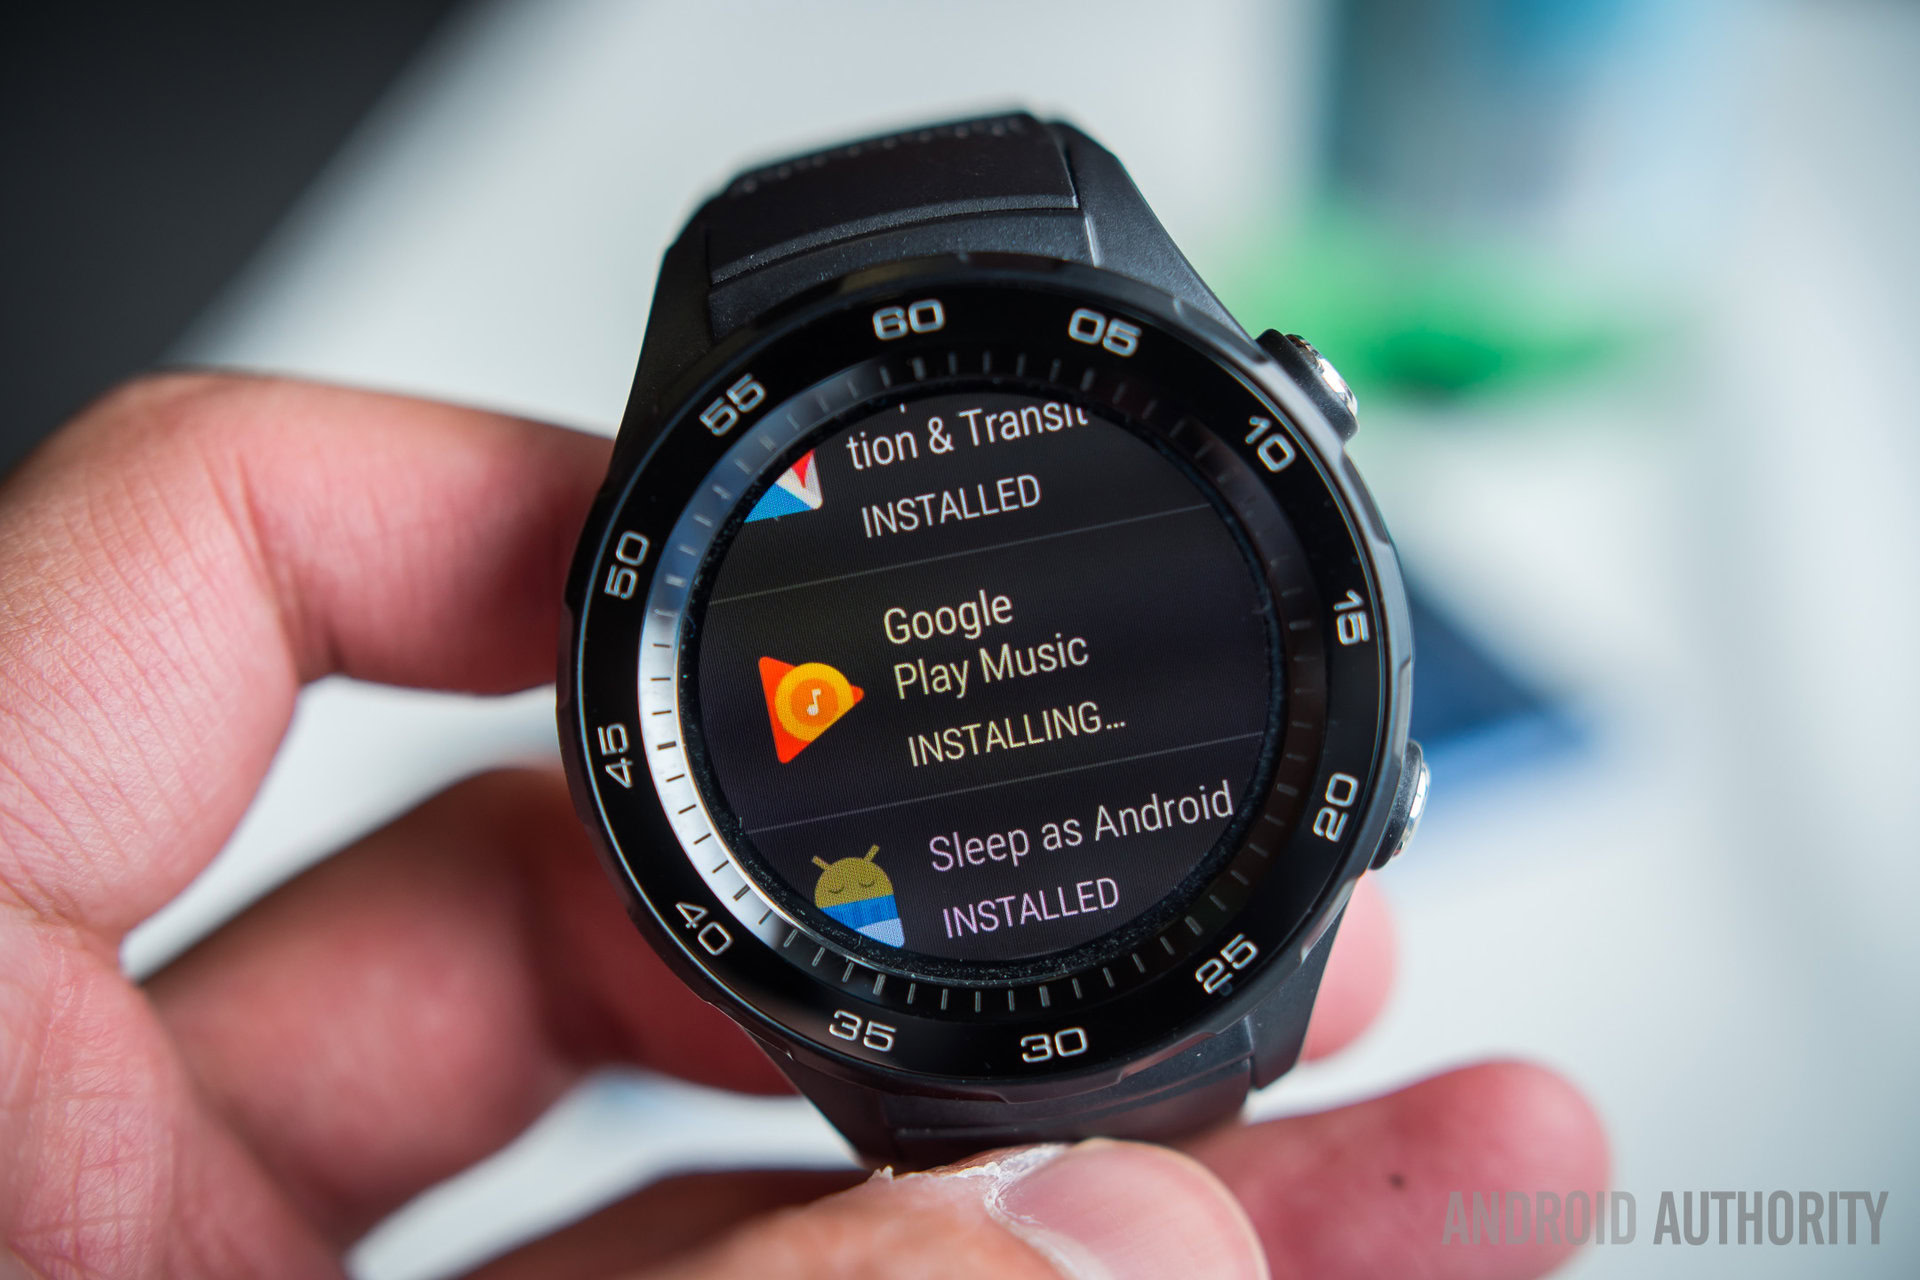 Watch 2 review - Android Authority